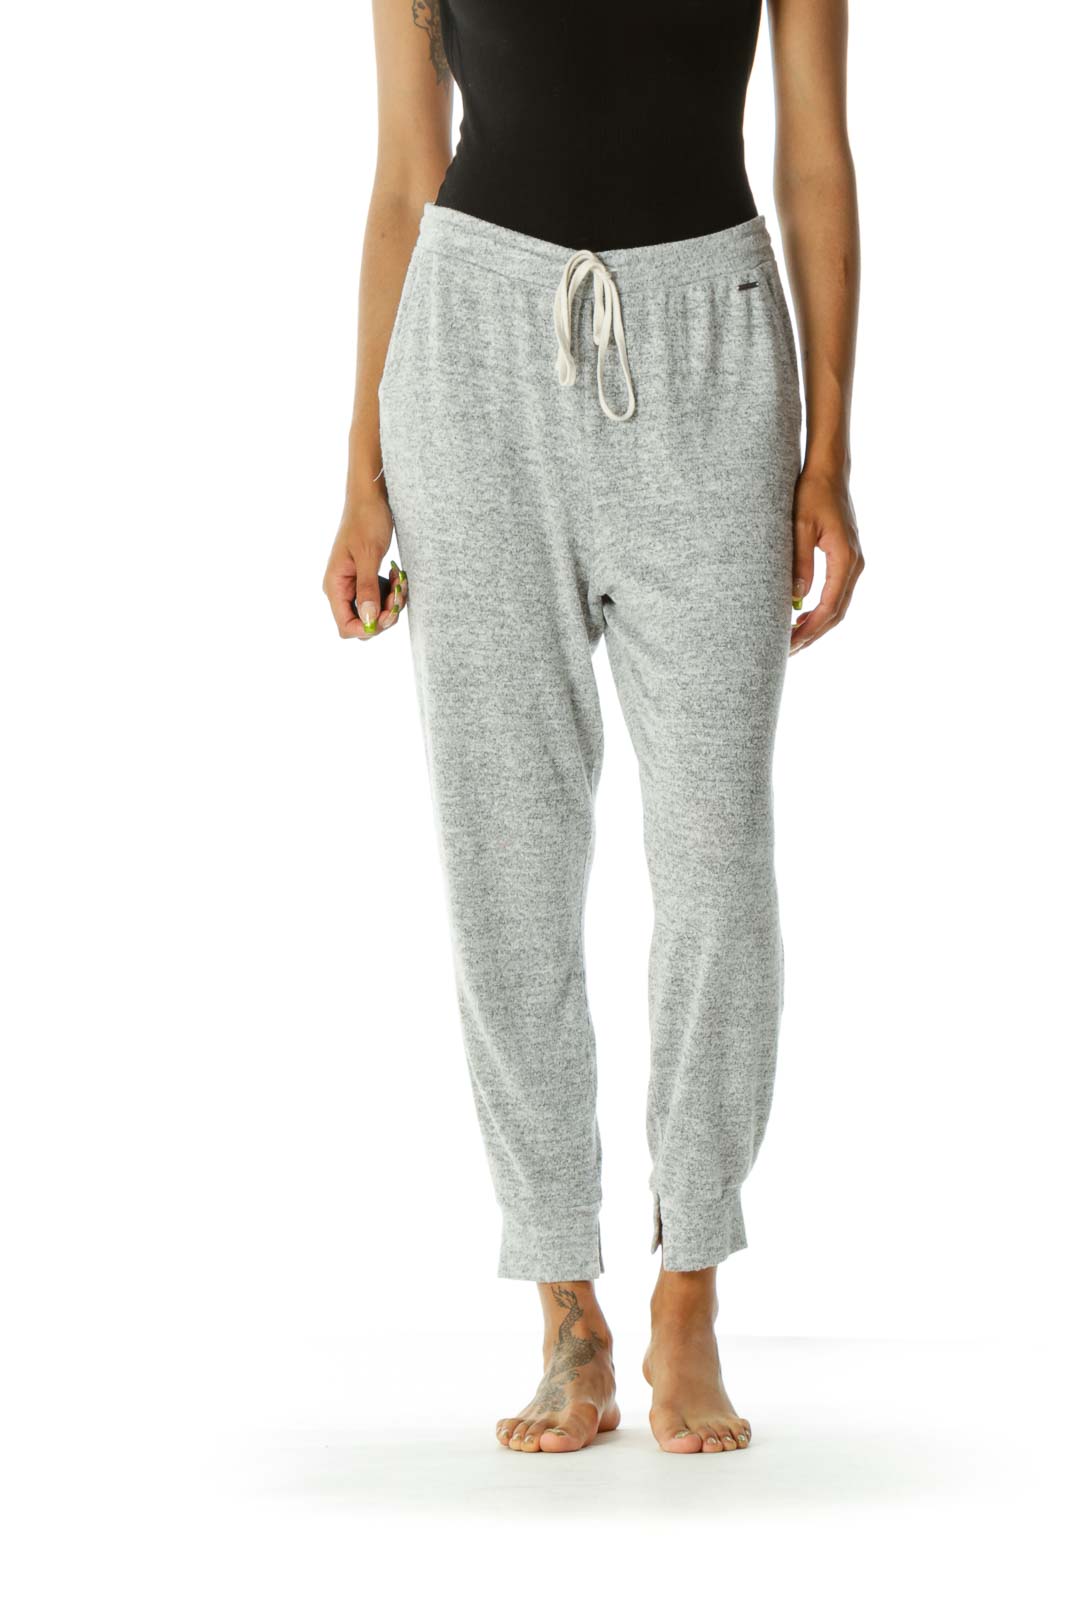 Gray Mottled Drawstring Stretch Comfy Pocketed Joggers Front